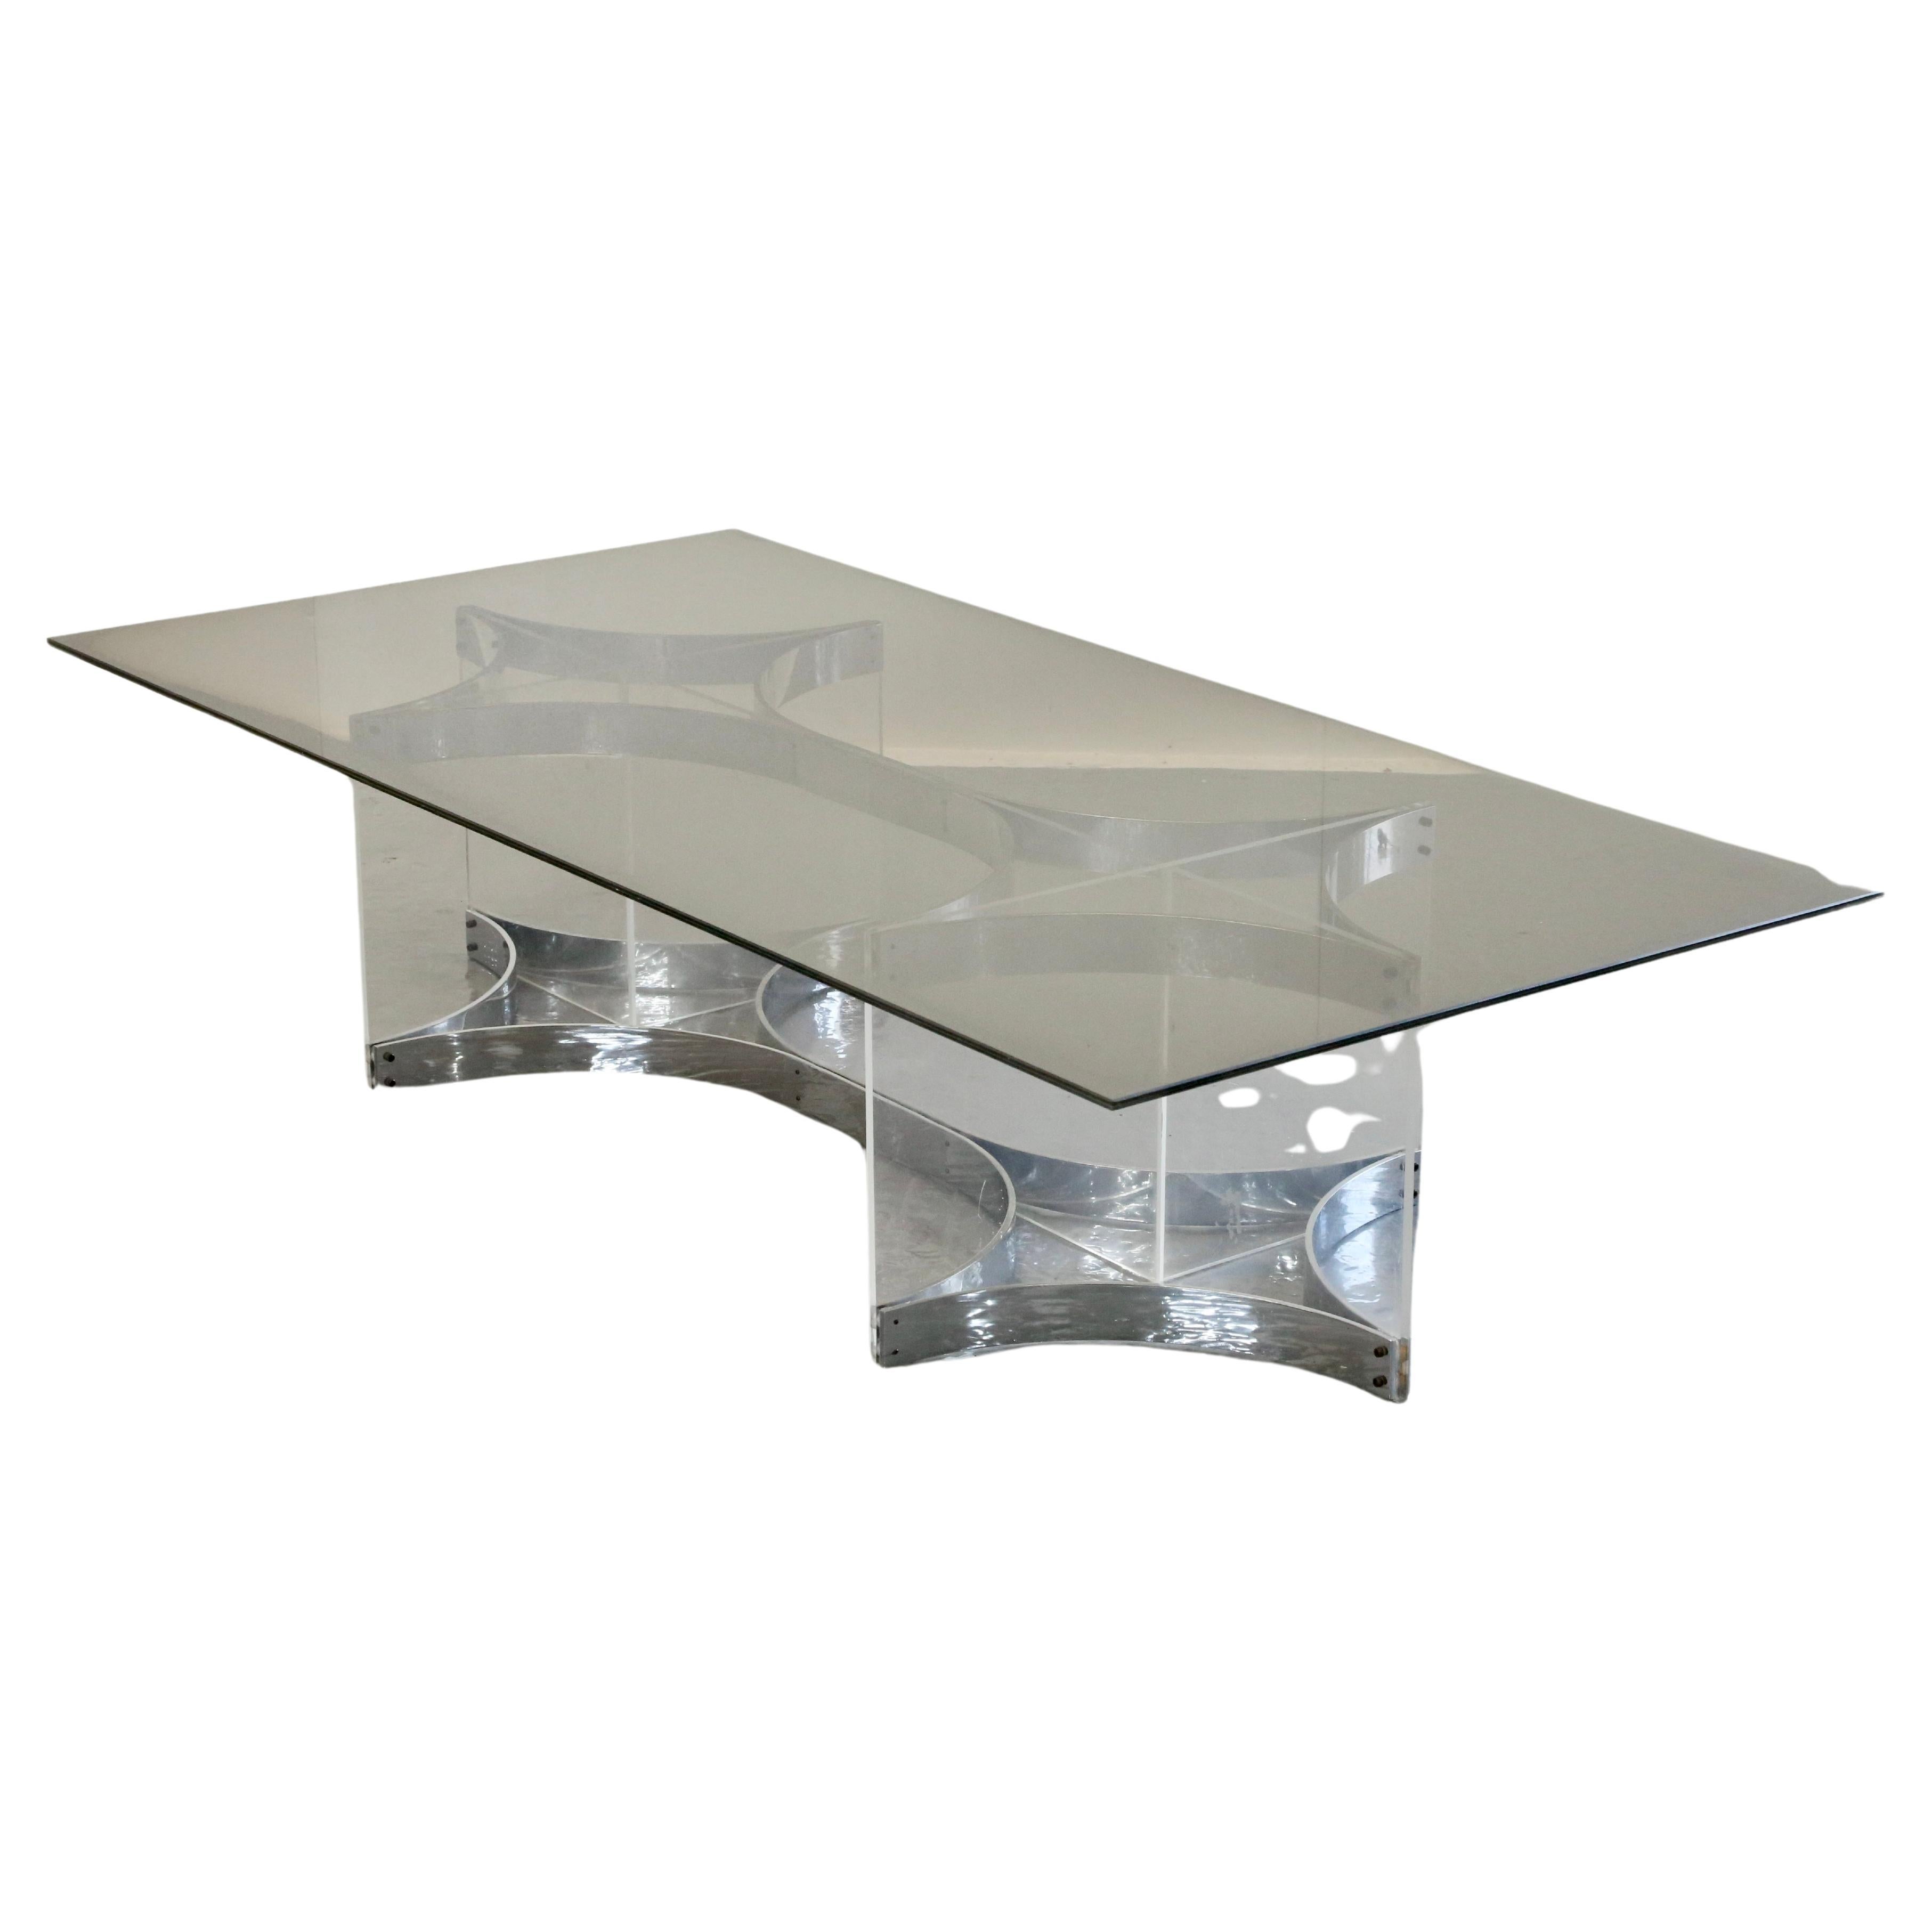 Alessandro Albrizzi, Fine Mid Century Chrome Plated Steel & Lucite Coffee Table For Sale